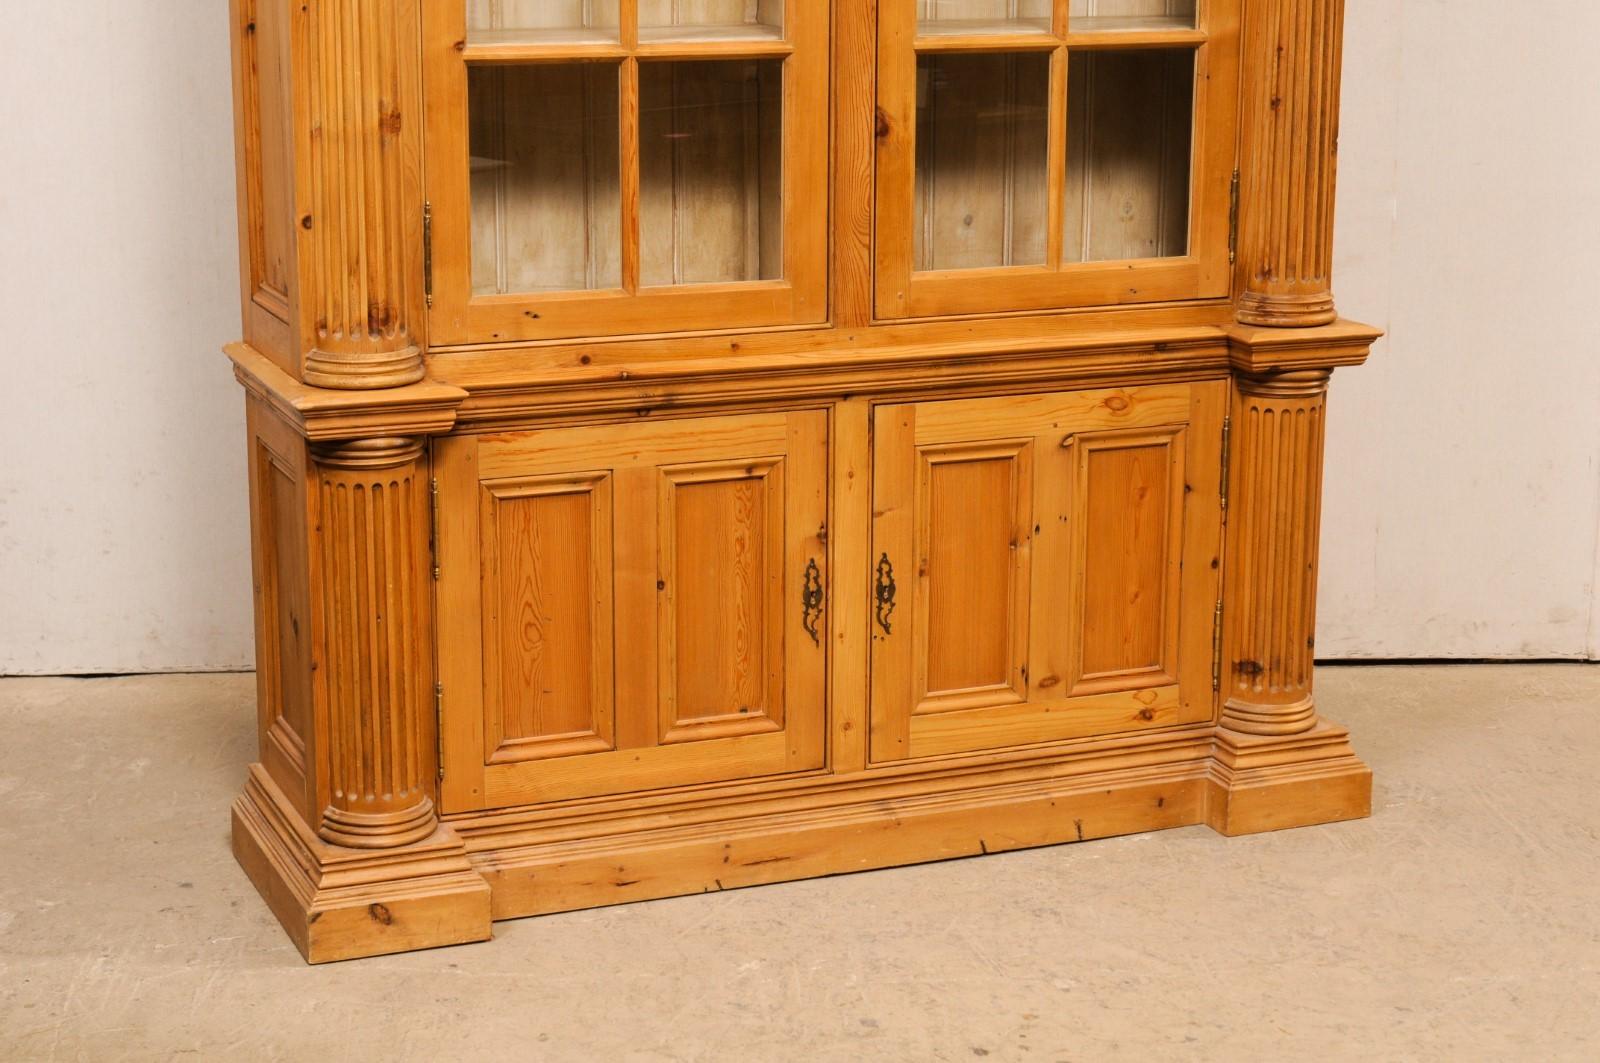 English Vintage Display & Storage Cabinet w/Carved Iconic Columns In Good Condition For Sale In Atlanta, GA